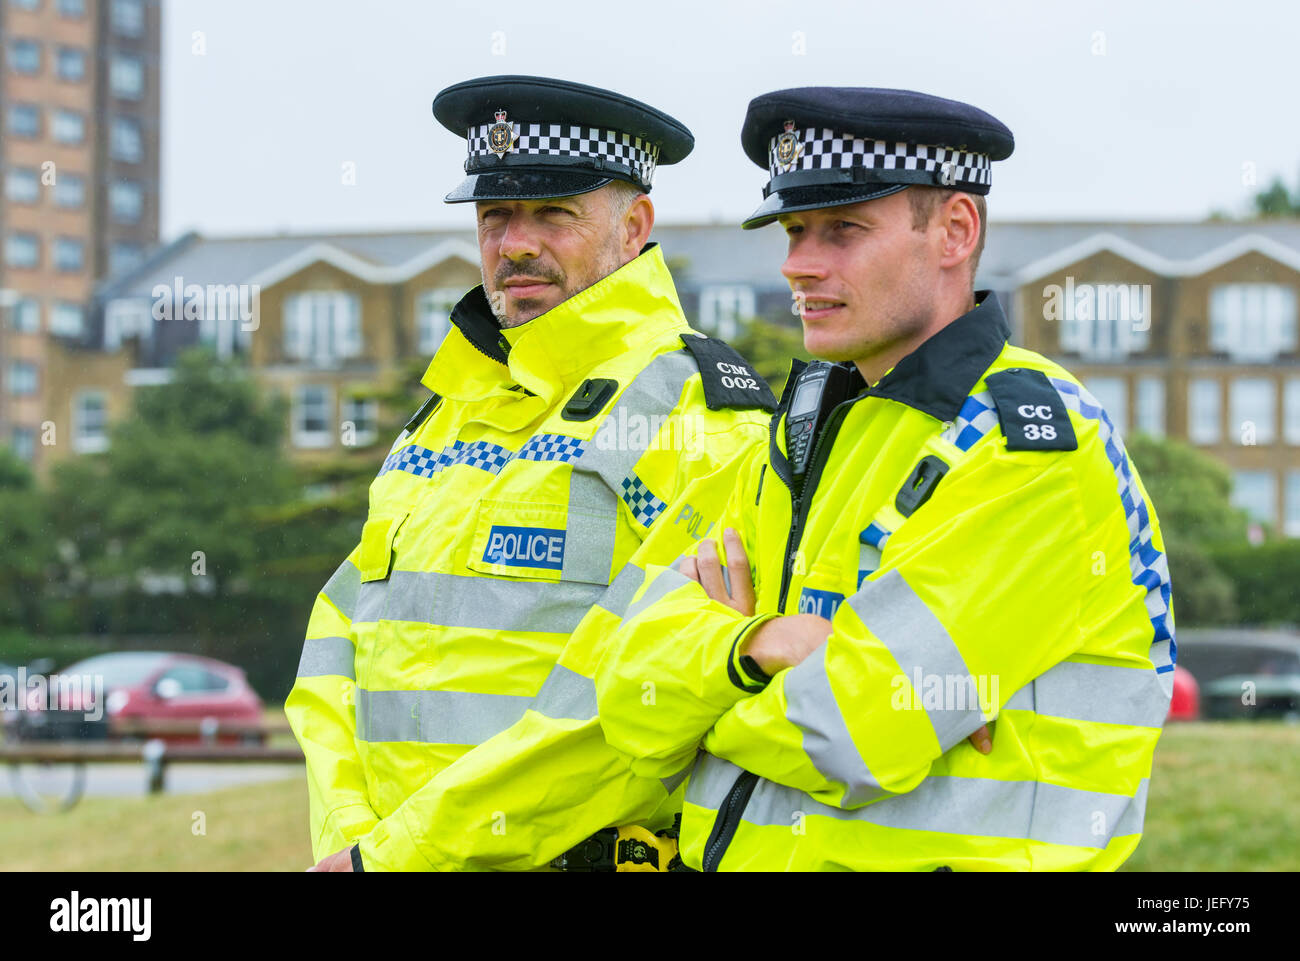 Pair of male police officers keeping watch at an outdoor event in the rain. UK Sussex Police officers. Stock Photo